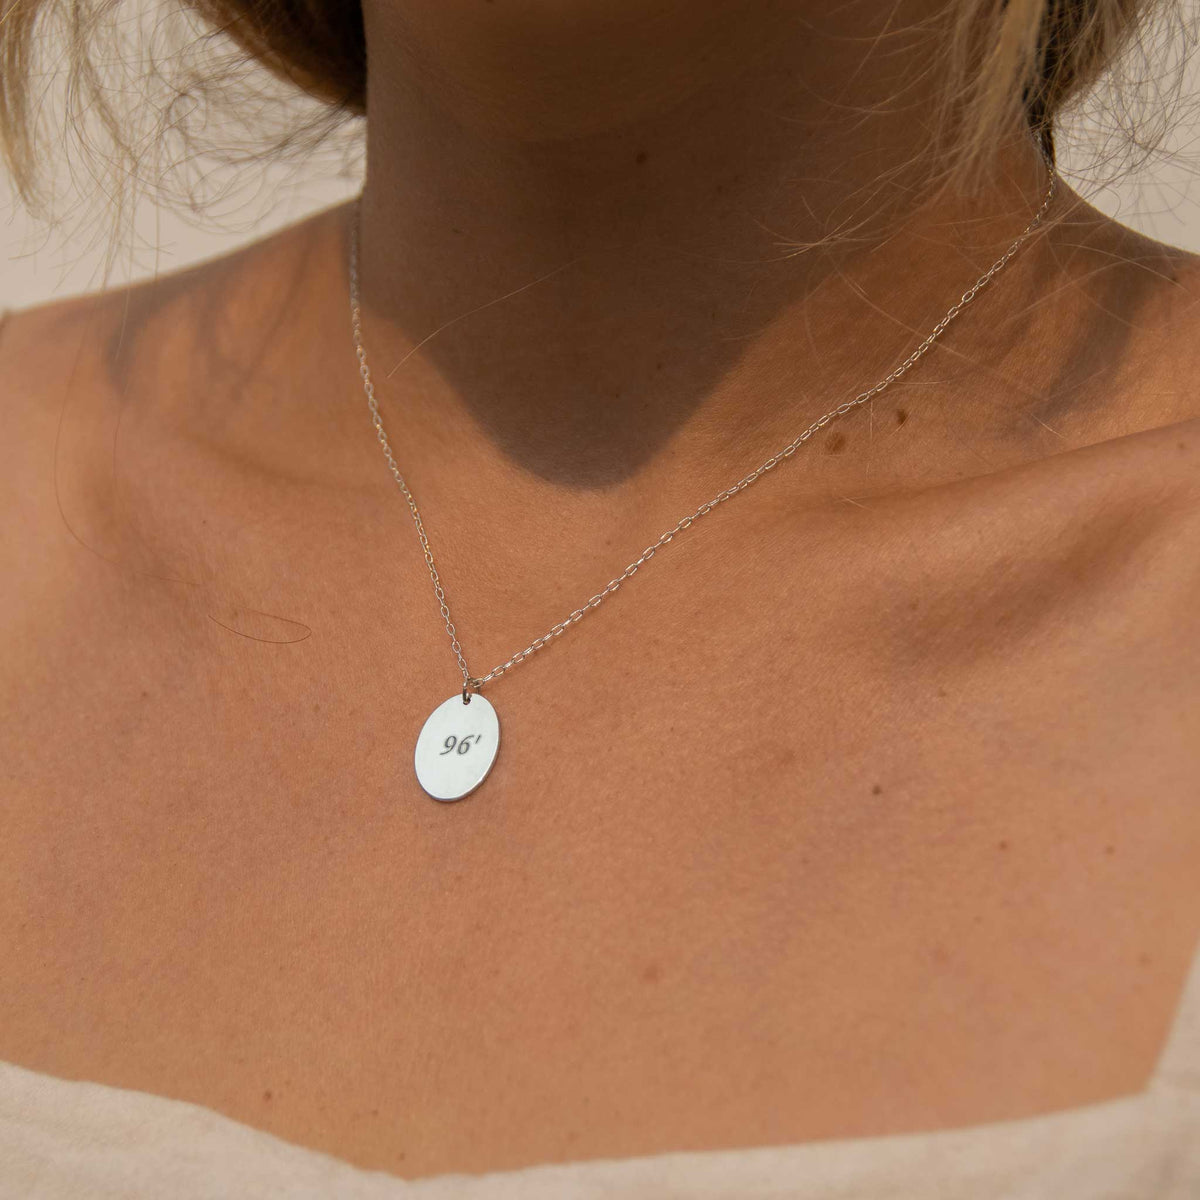 up close of model wearing a silver oval necklace with 96&#39; engraved.